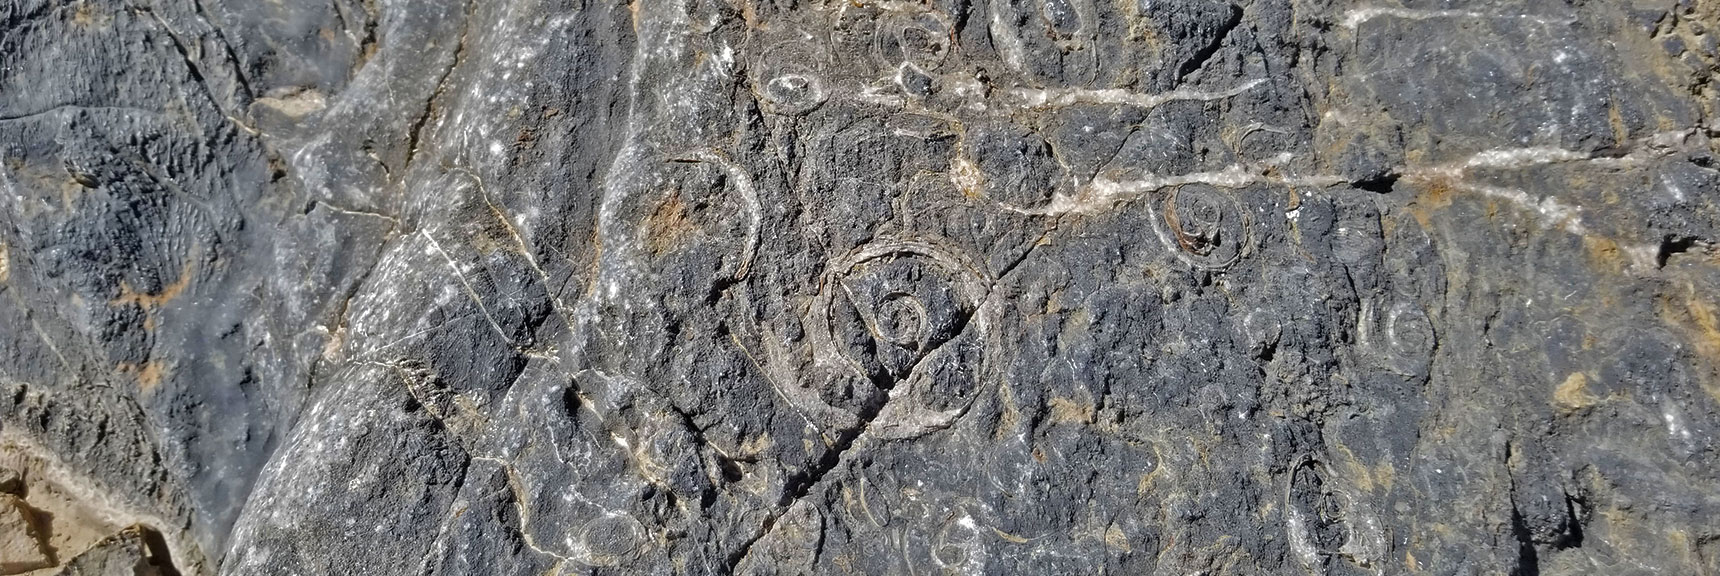 Fossils Embedded in Rock at North Base of Fossil Ridge | Fossil Ridge End to End | Sheep Range | Desert National Wildlife Refuge, Nevada